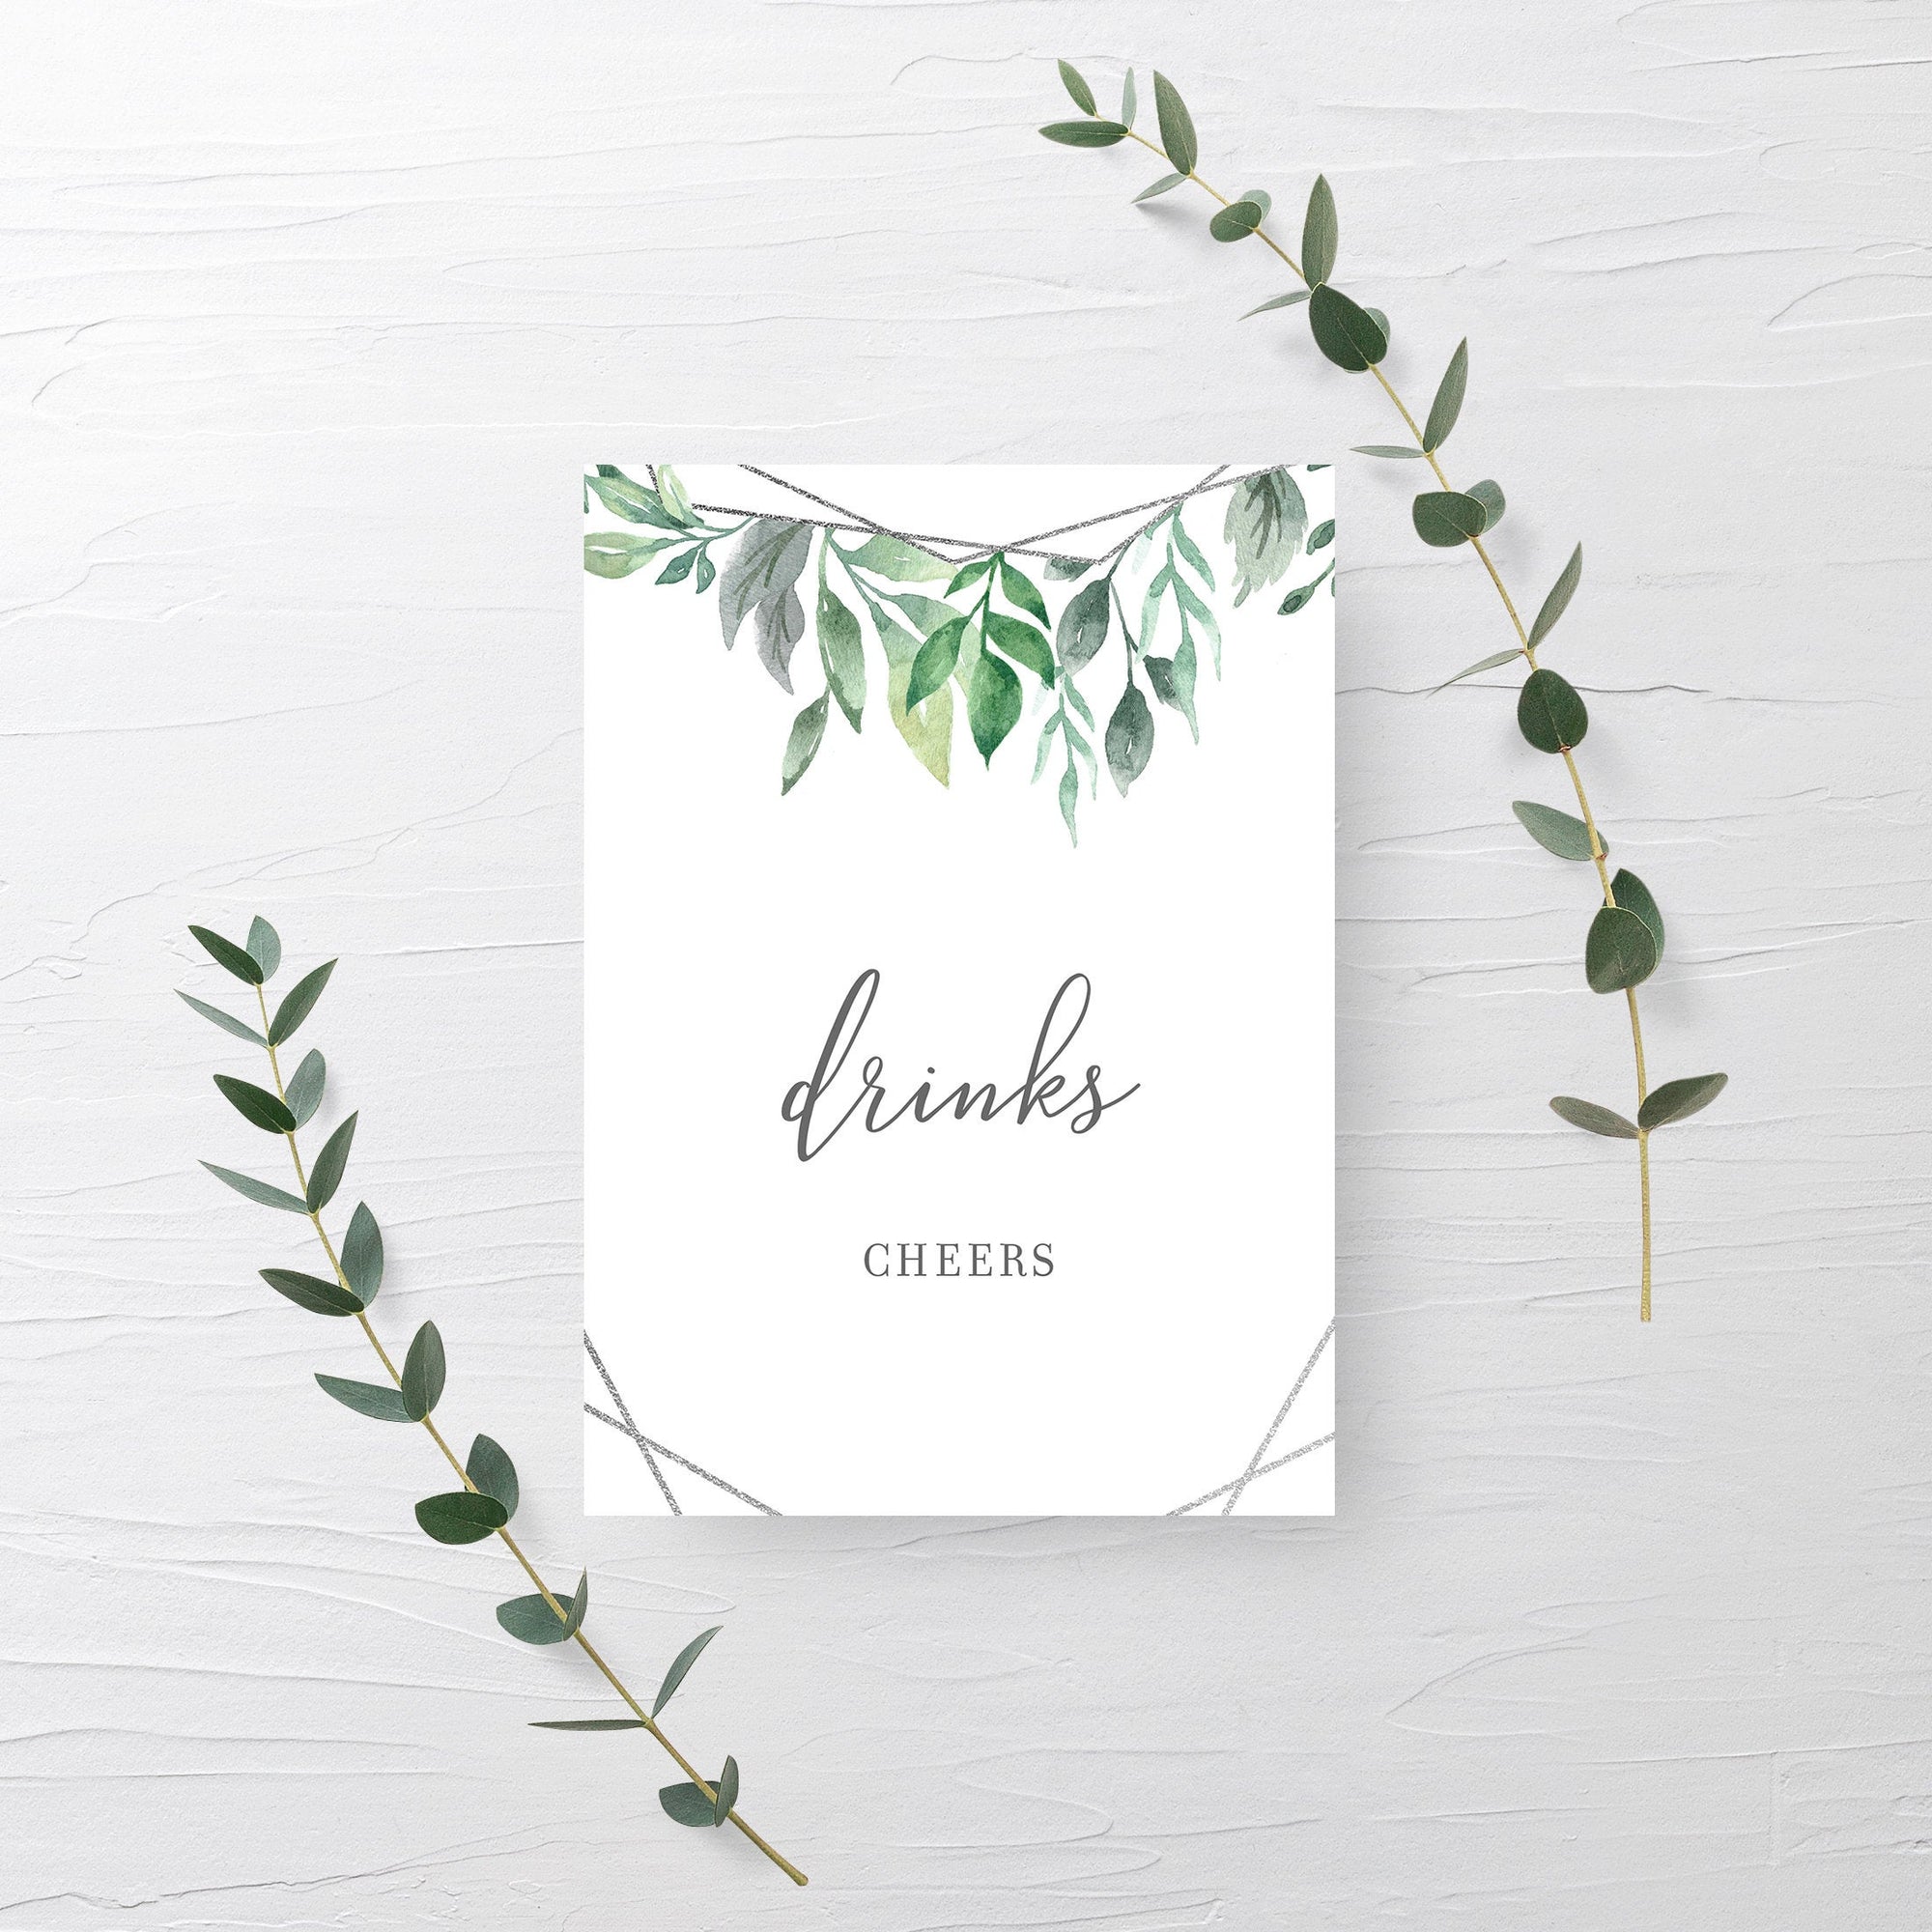 Geometric Silver Greenery Printable Drinks Sign INSTANT DOWNLOAD, Bridal Shower, Baby Shower, Wedding Decorations and Supplies - GFS100 - @PlumPolkaDot 